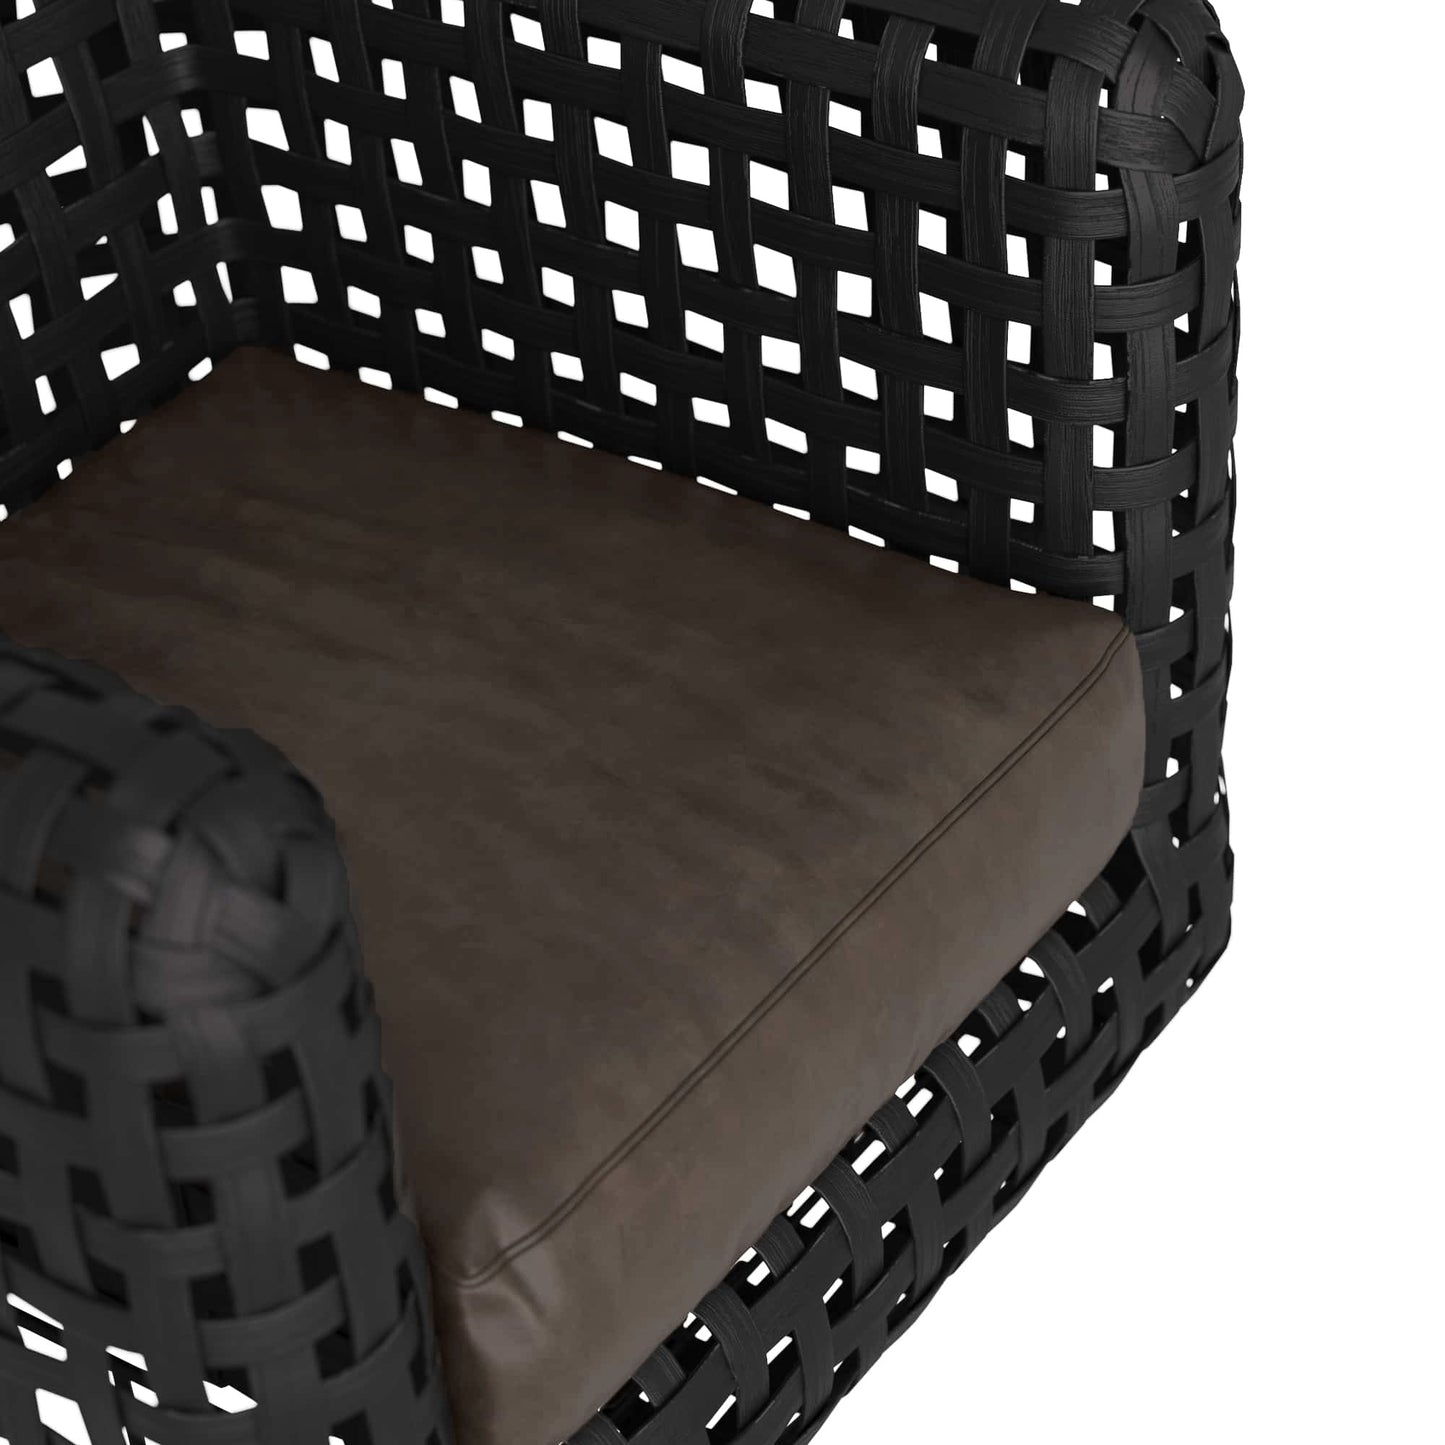 Templar Chair - Graphite Leather - Handcrafted Rattan Lounge Chair